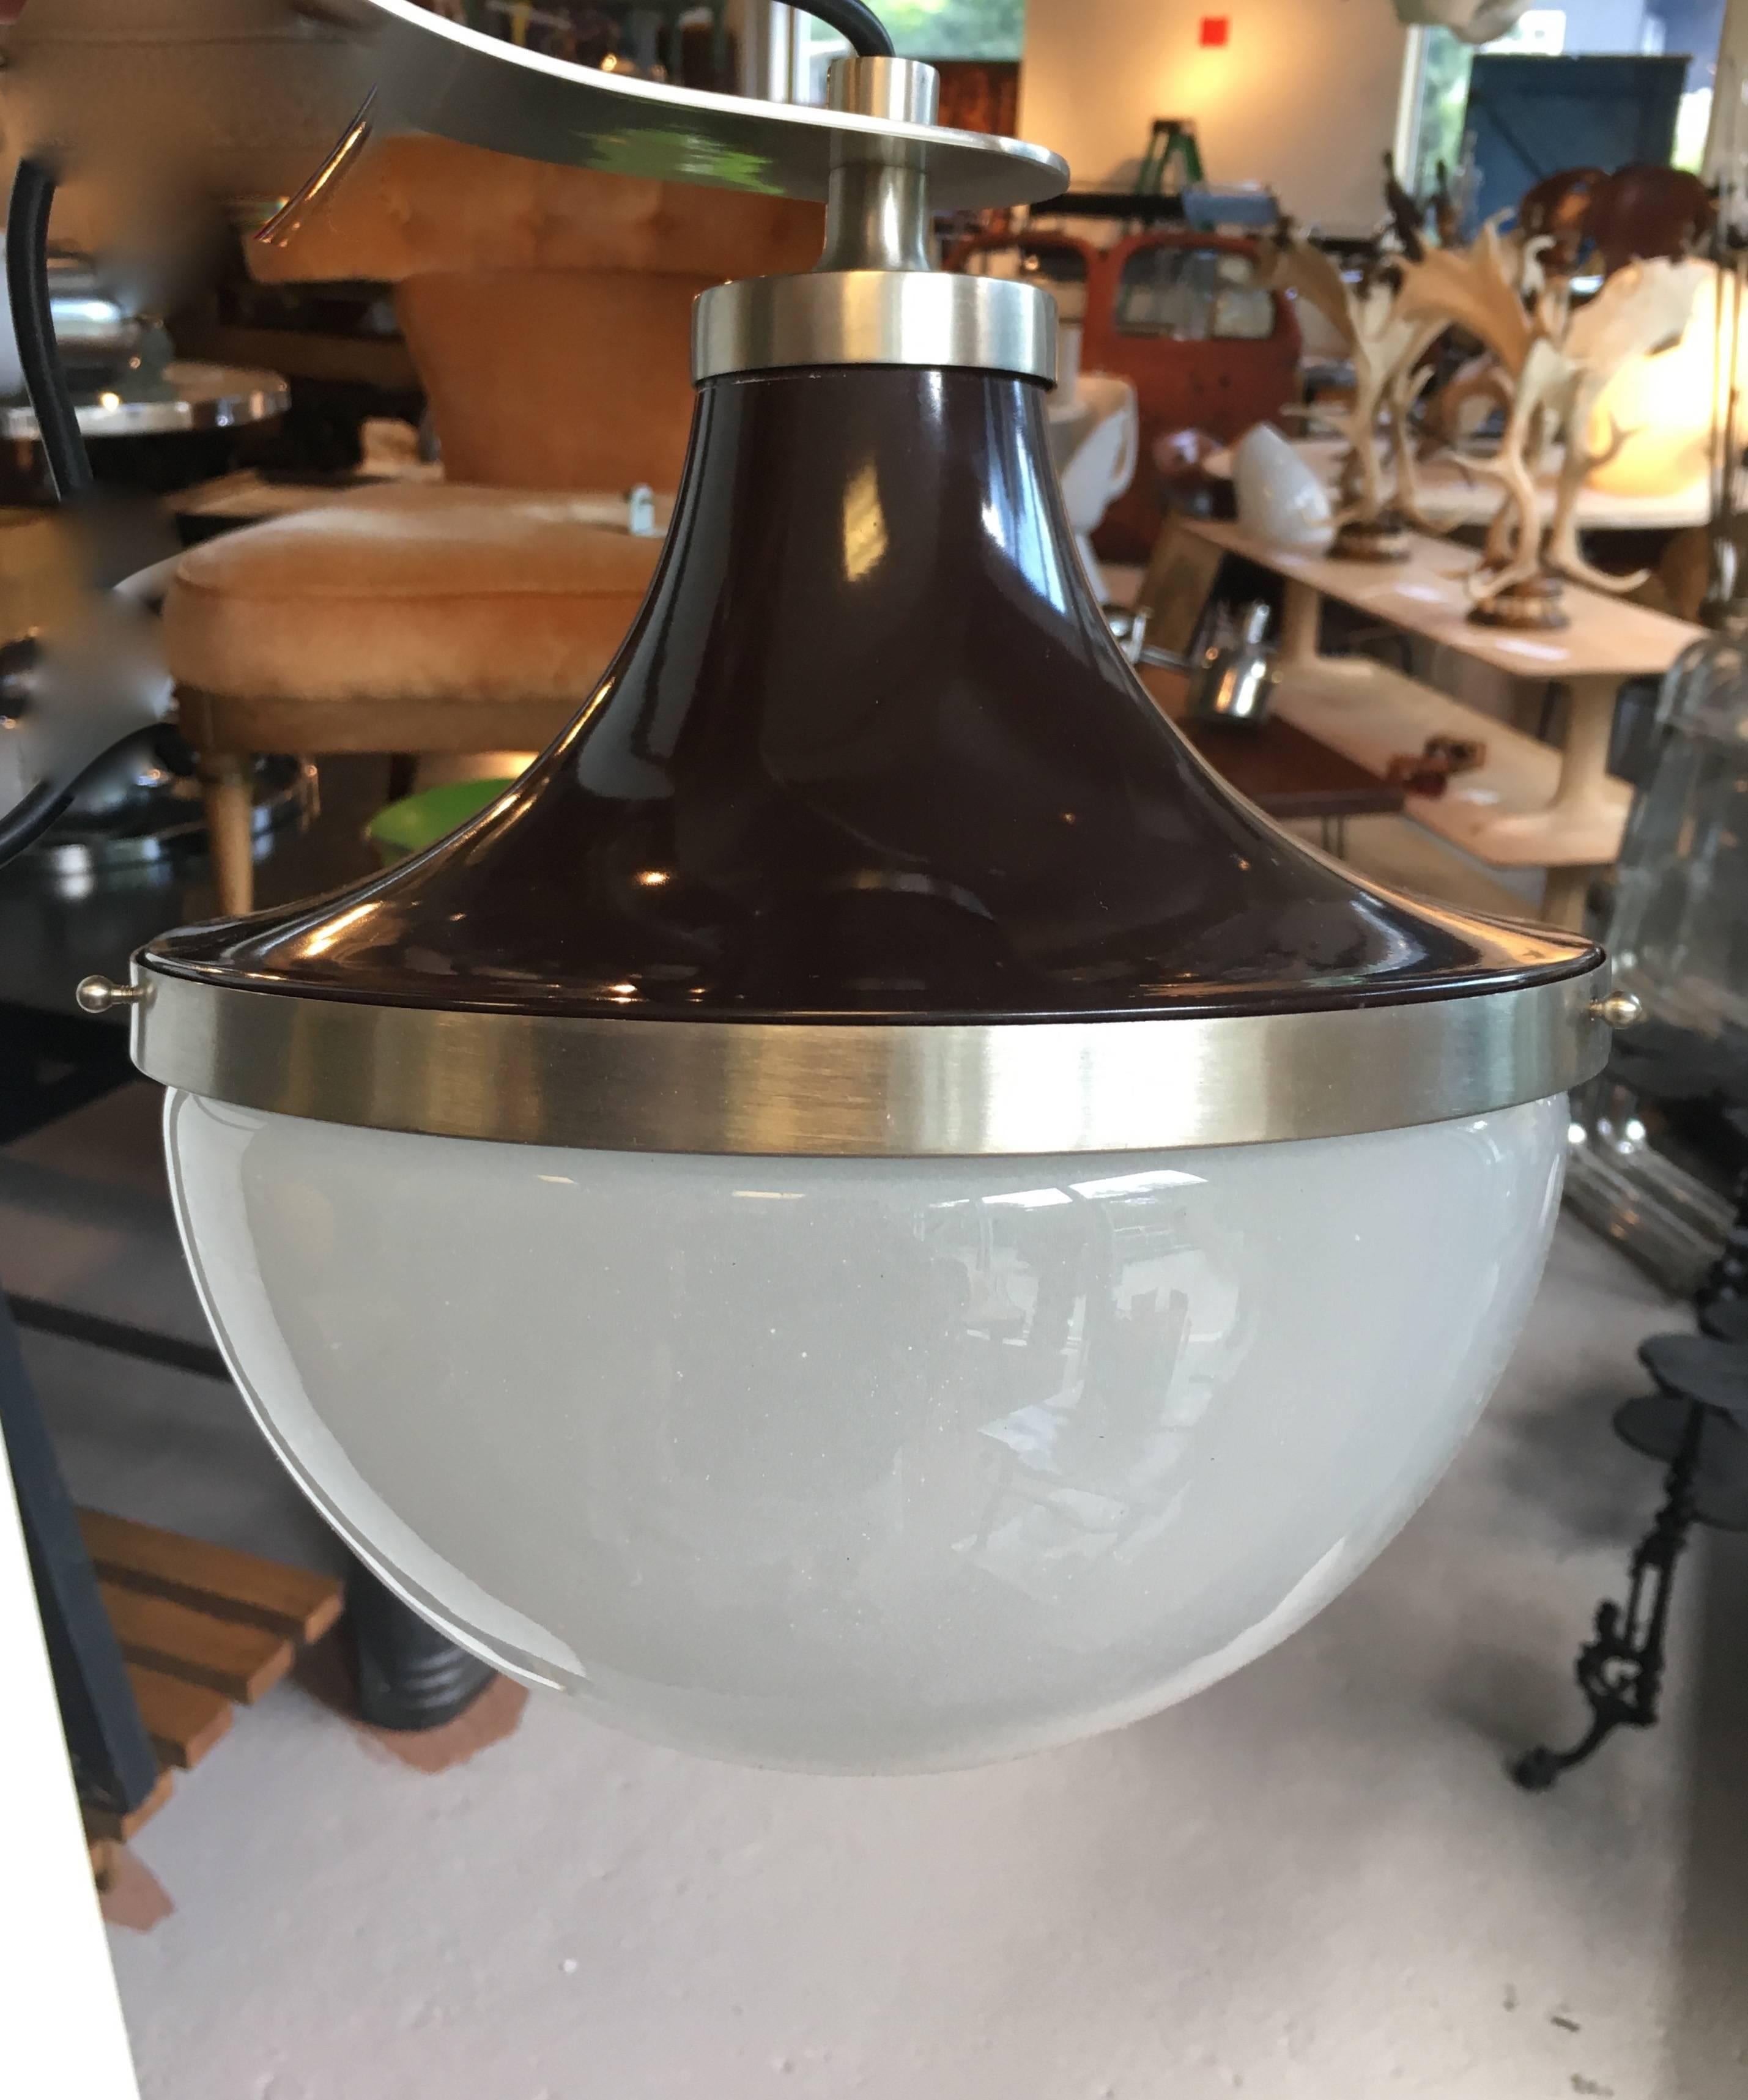 Pair of versatile Sergio Mazza light fixtures which can be hanging pendants or wall sconces, enameled metal with glass shades, and brushed metal detail; pole or fittings can be customized to your specifications.

Avantgarden Ltd. cultivates